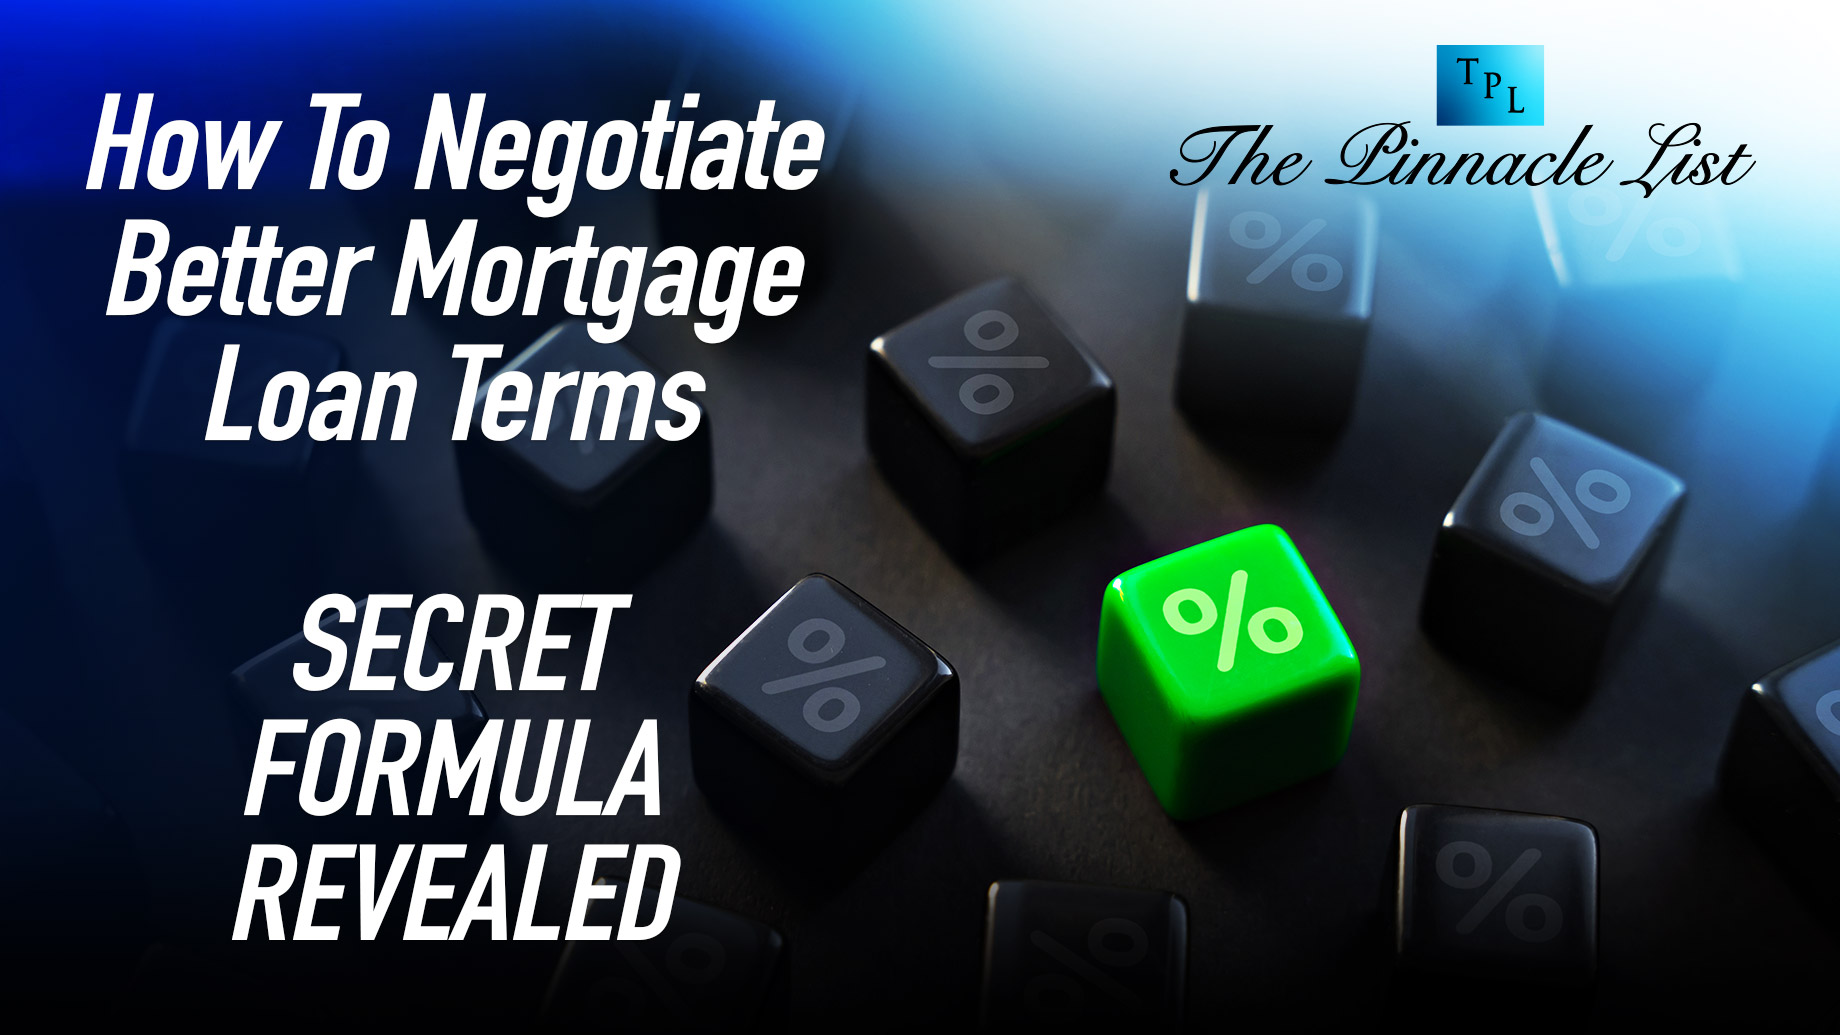 How To Negotiate Better Mortgage Loan Terms: Secret Formula Revealed